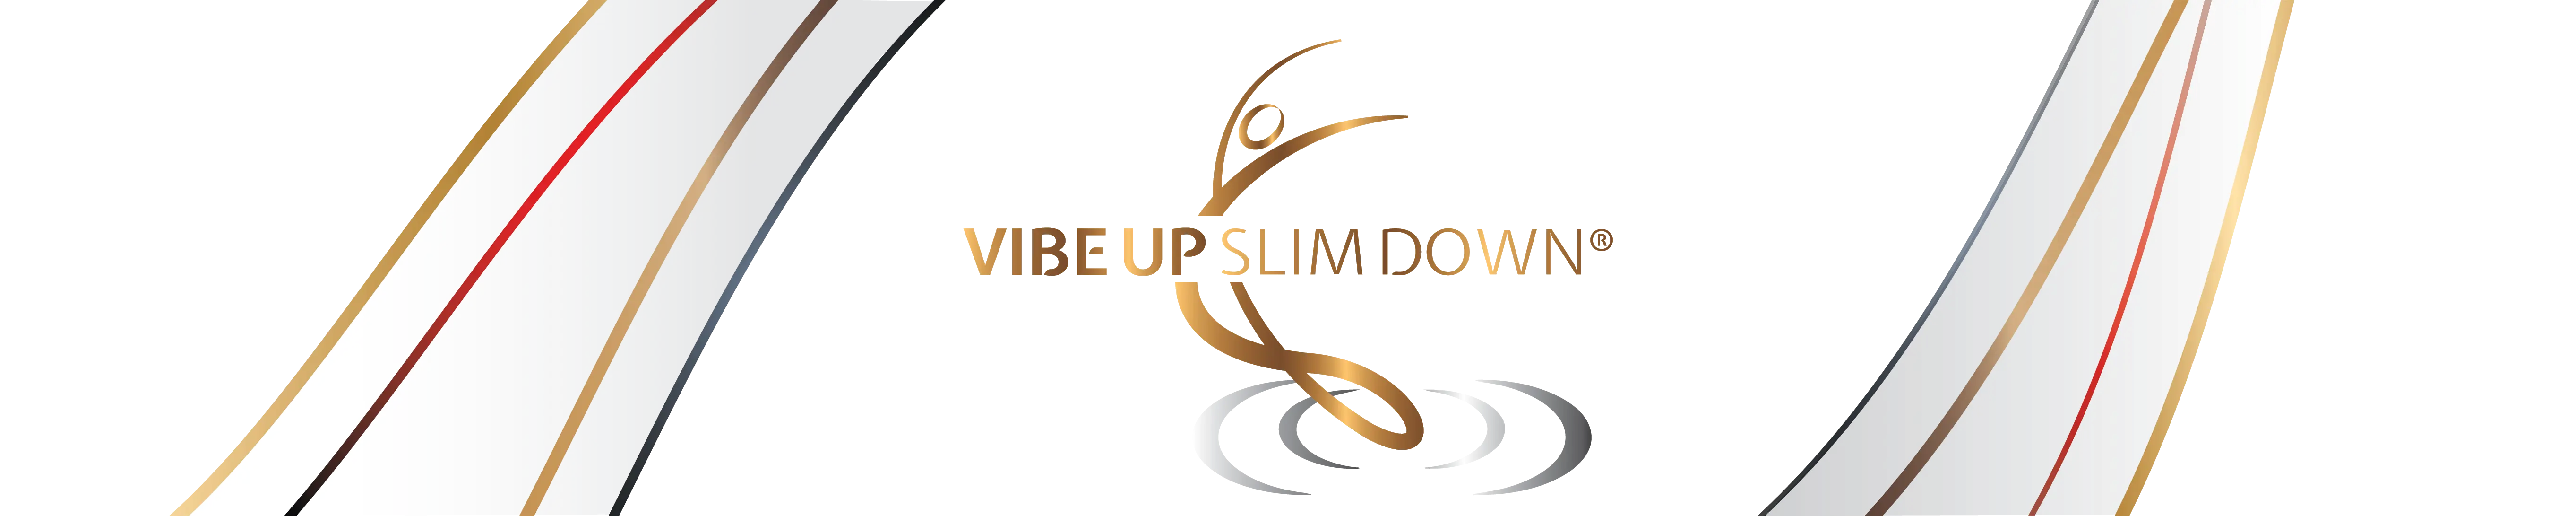 Personal Coach Samantha Edwards’s Vibe Up Slim Down Coaching Becomes a Growing Success